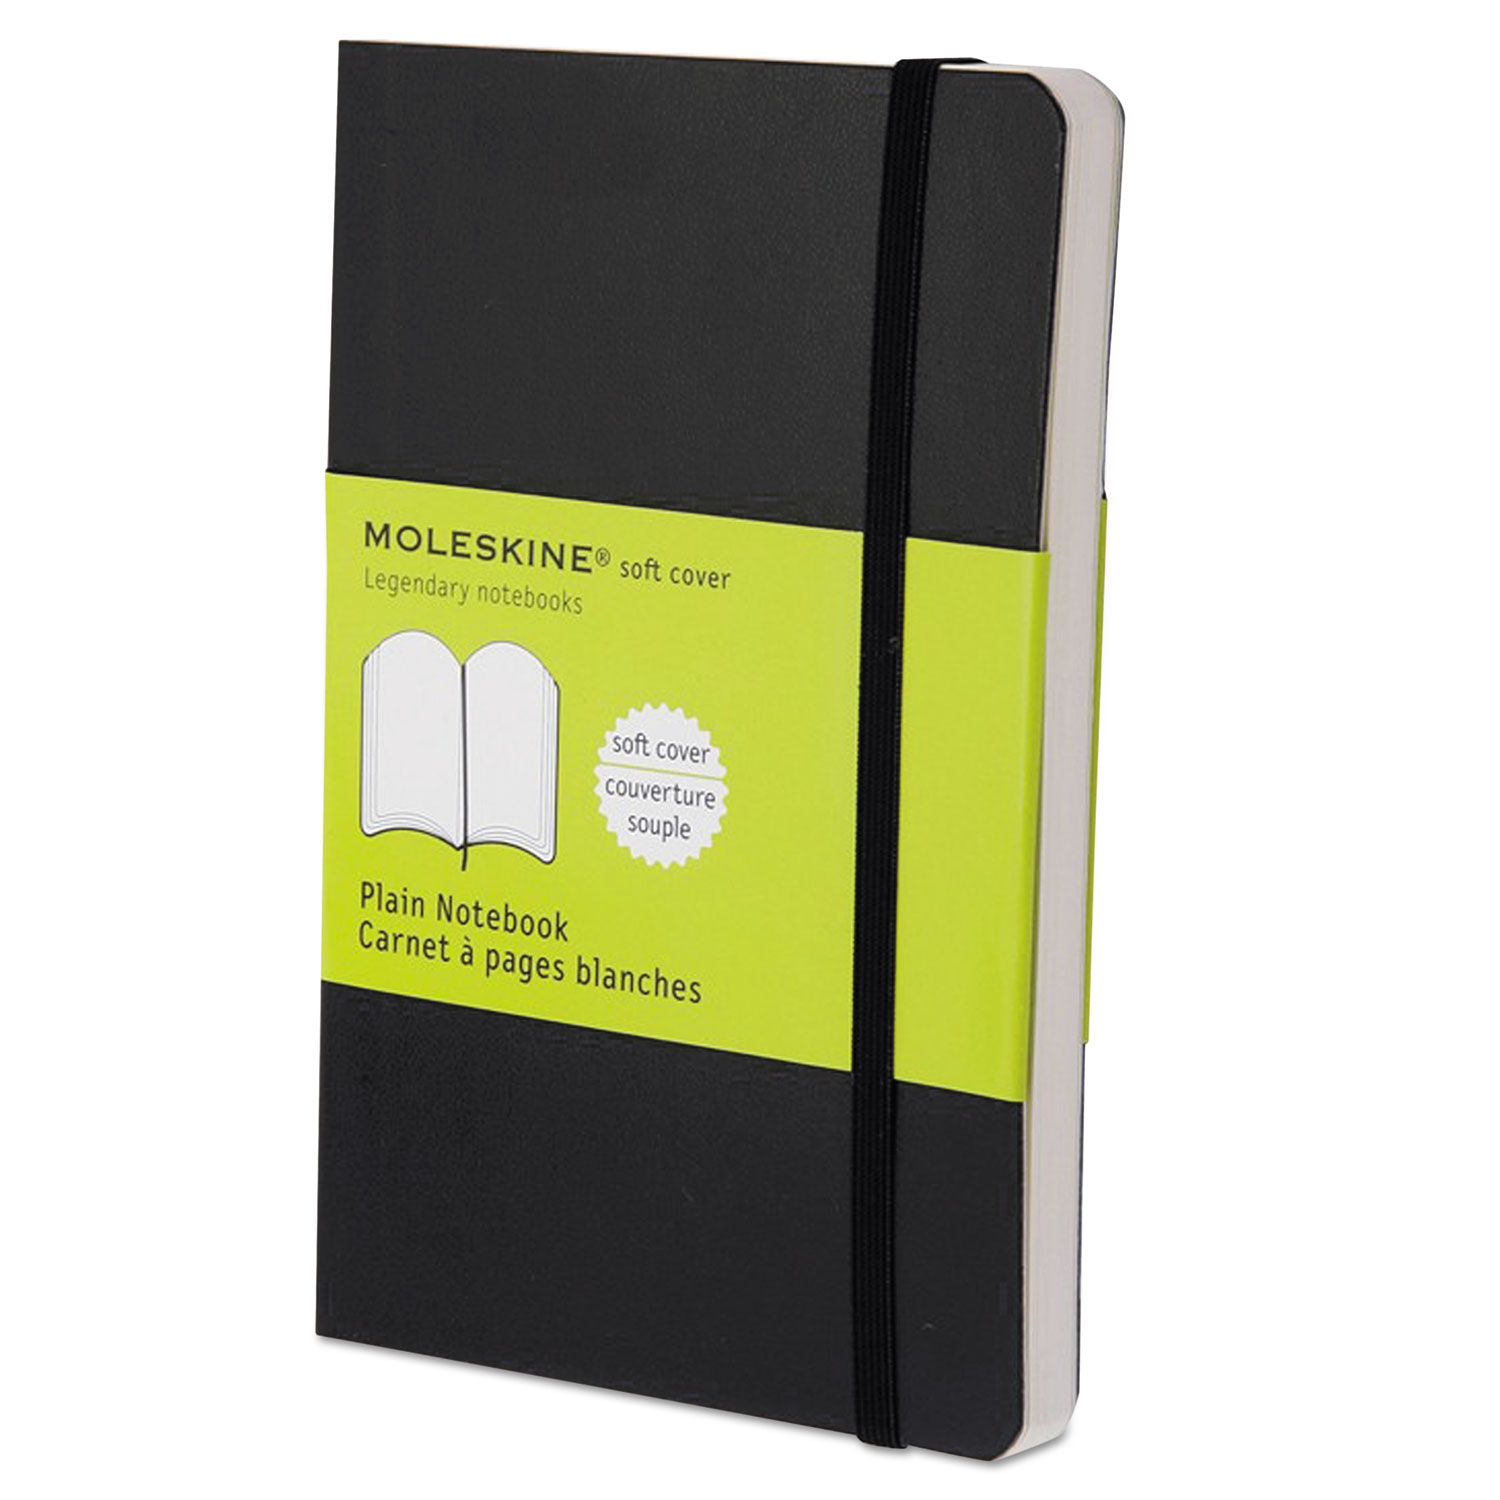  Moleskine 9788883707148 Classic Softcover Notebook, Unruled, Black Cover, 5.5 x 3.5, 192 Sheets (HBGMS717) 